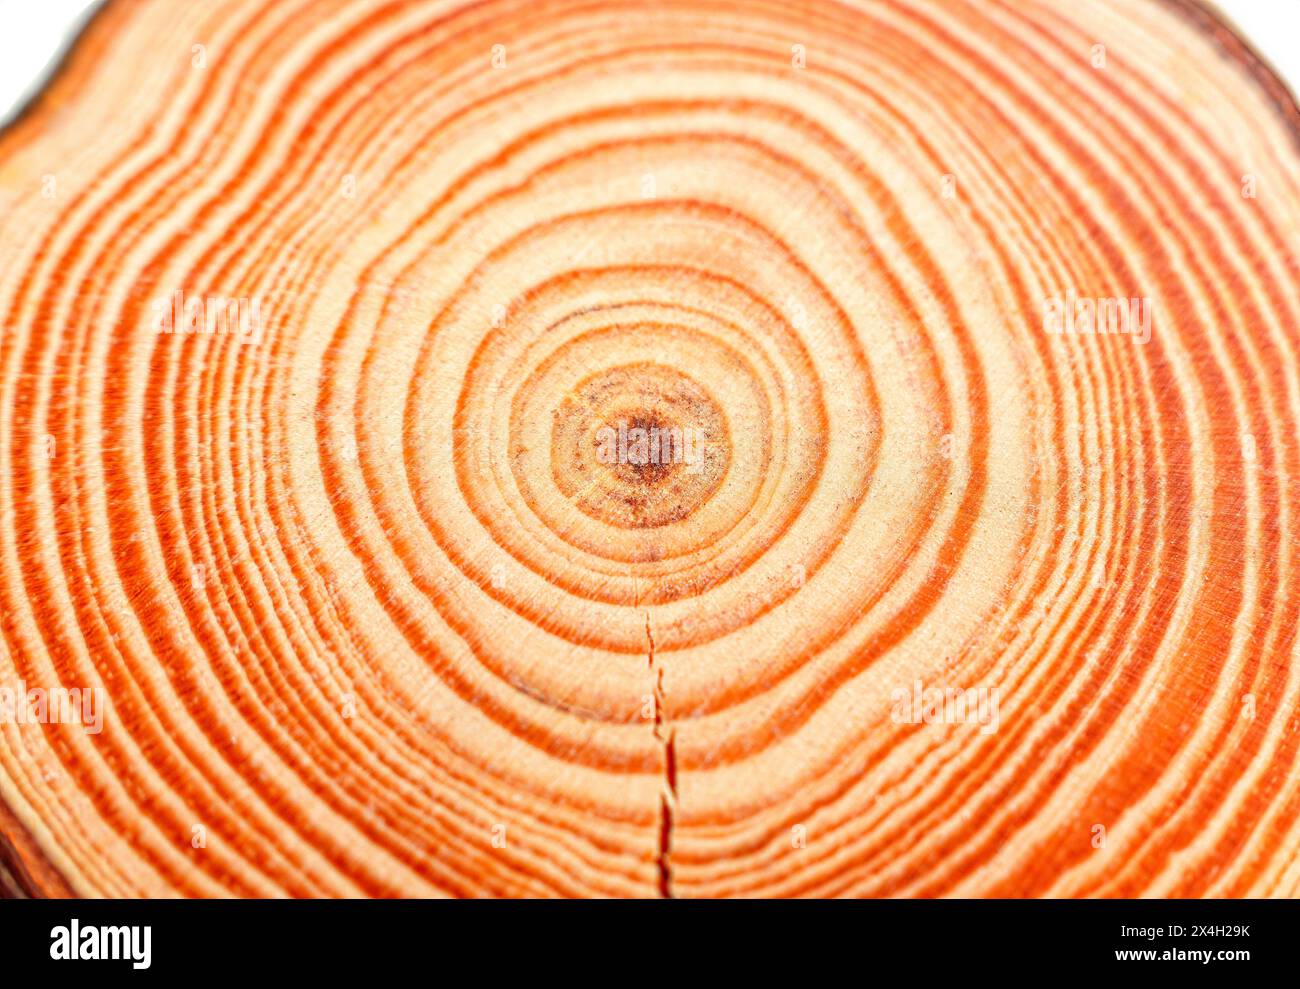 Slice of wood showing extreme close-up of the concentric annual rings spaced on the surface. Stock Photo